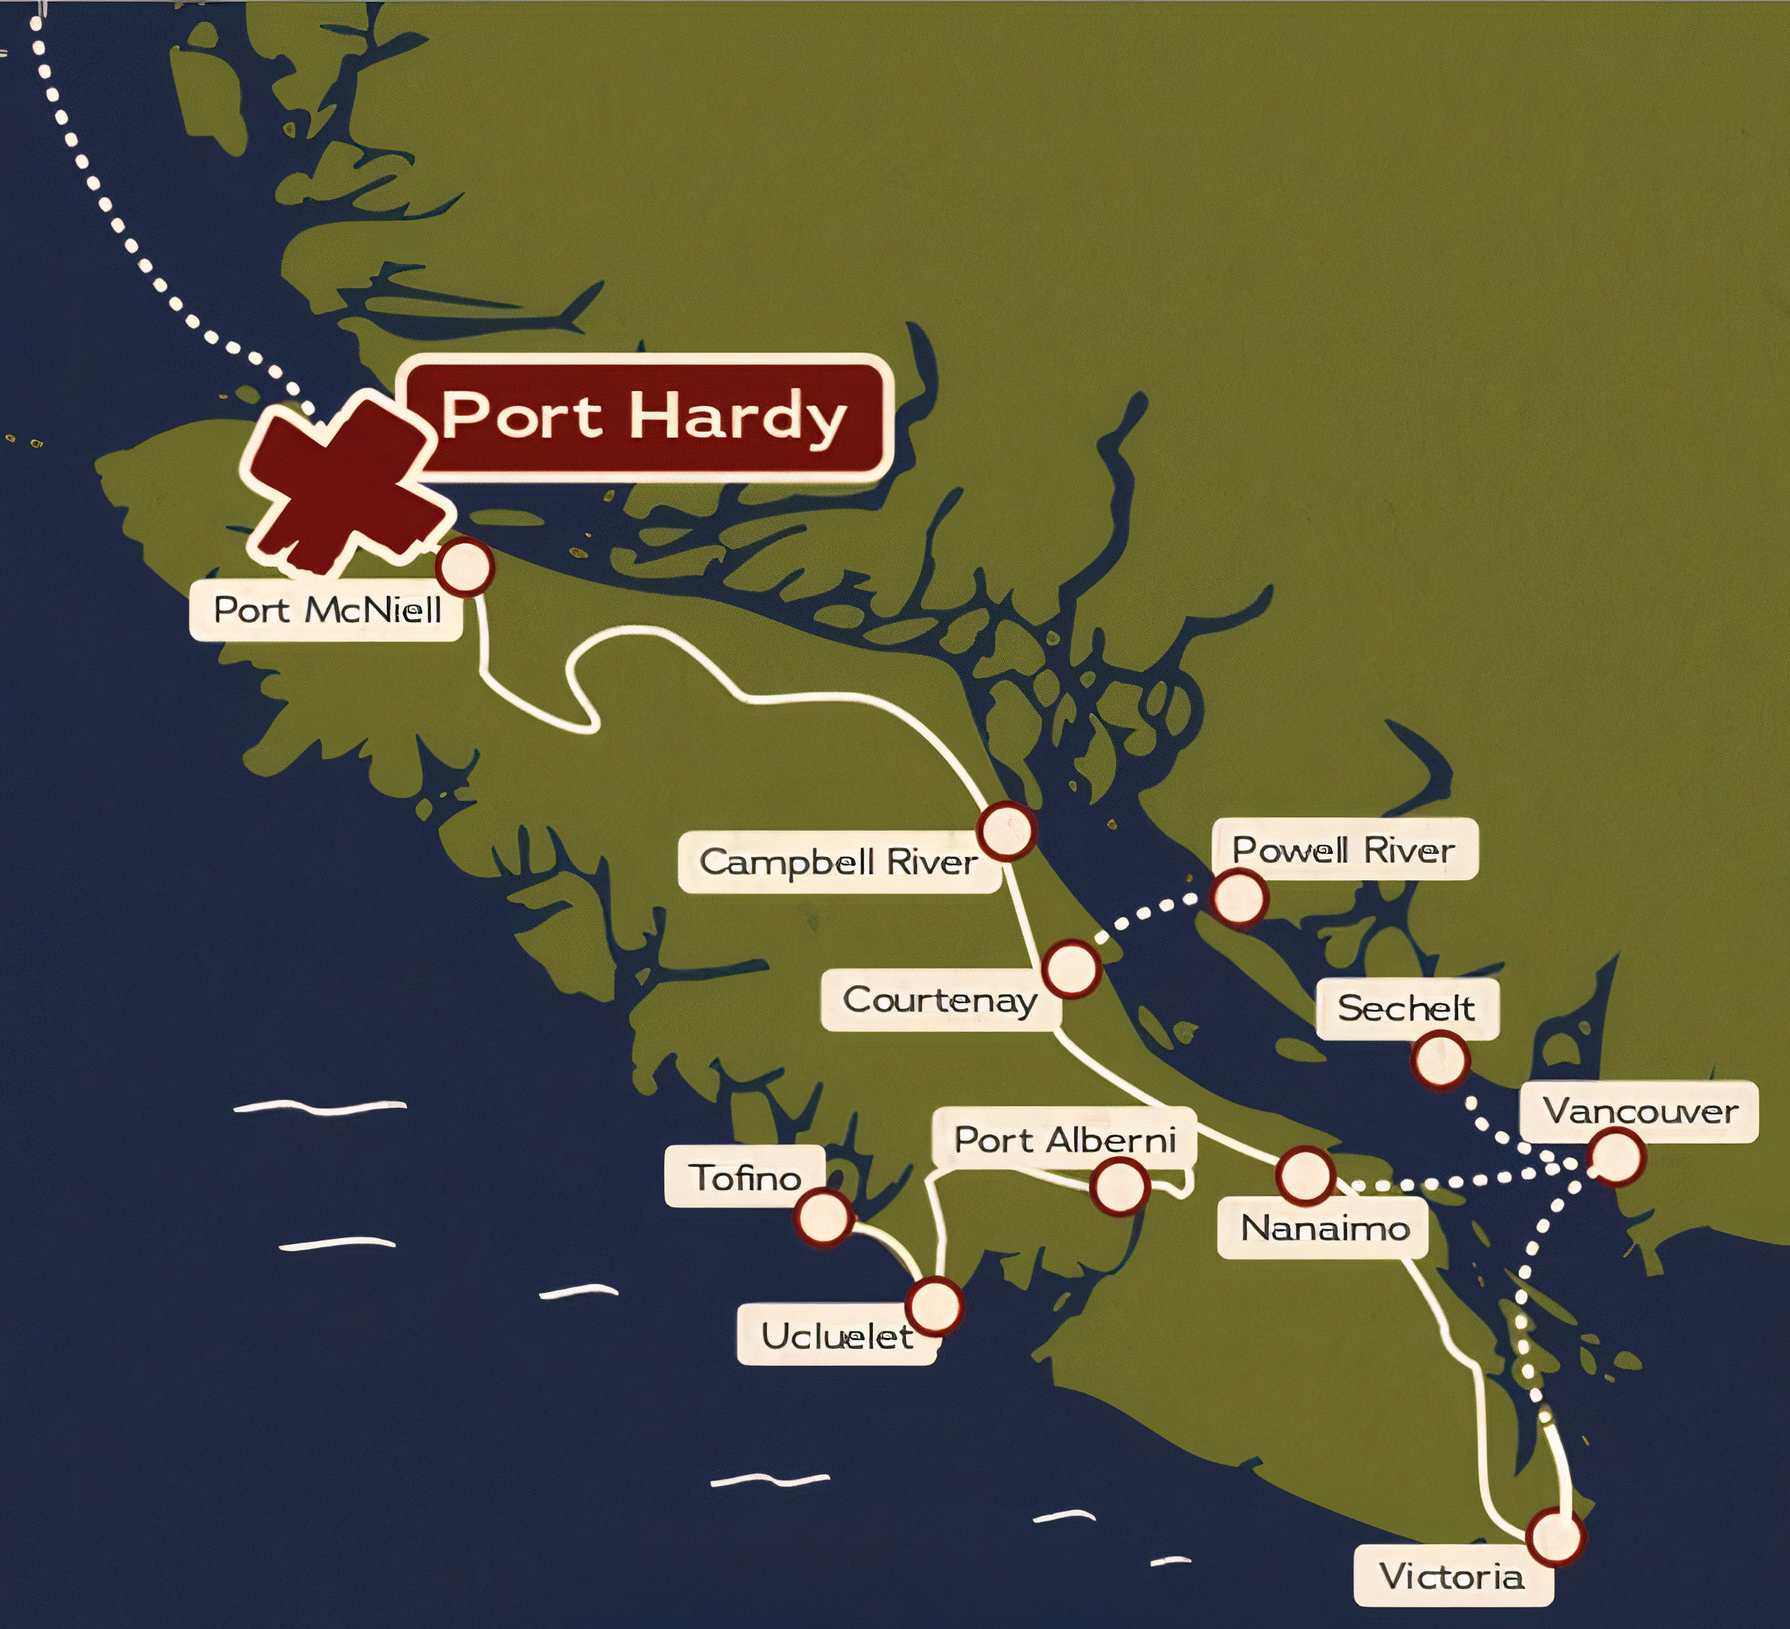 North Island Map showing all the tourist destination to be visited between Vancouver and port hardy